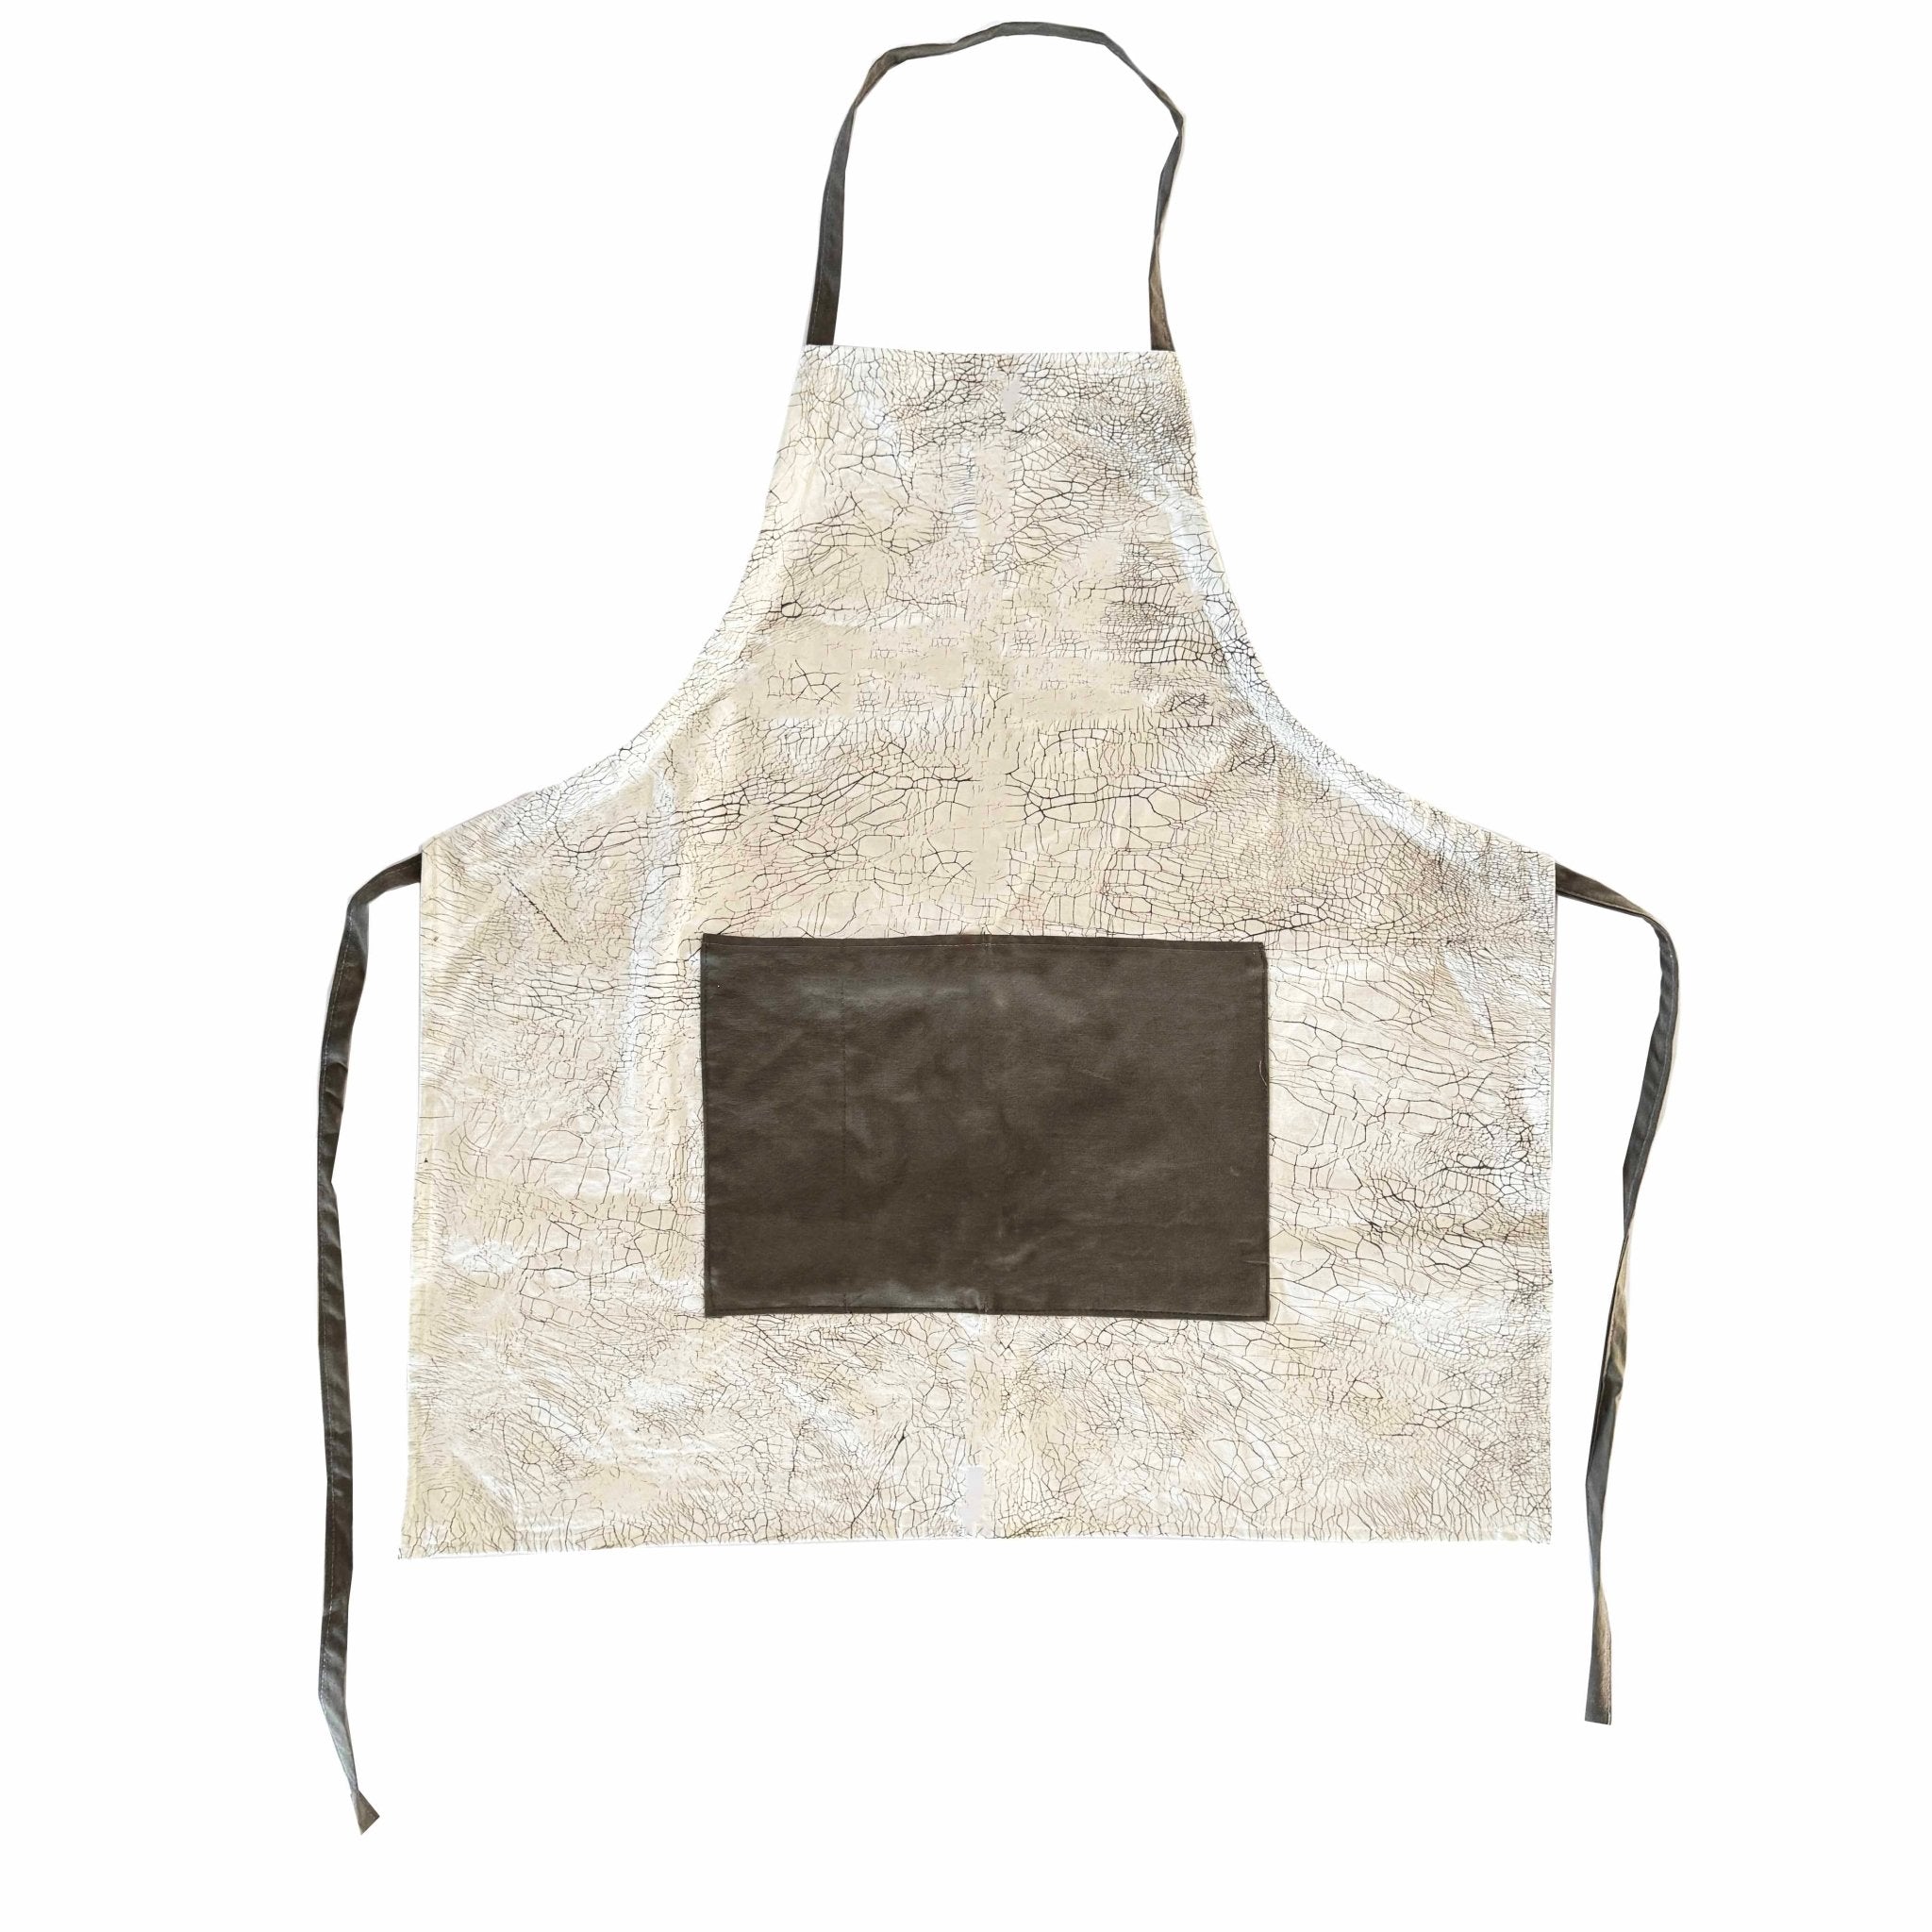 One size adjustable apron made in 100% eco cotton.